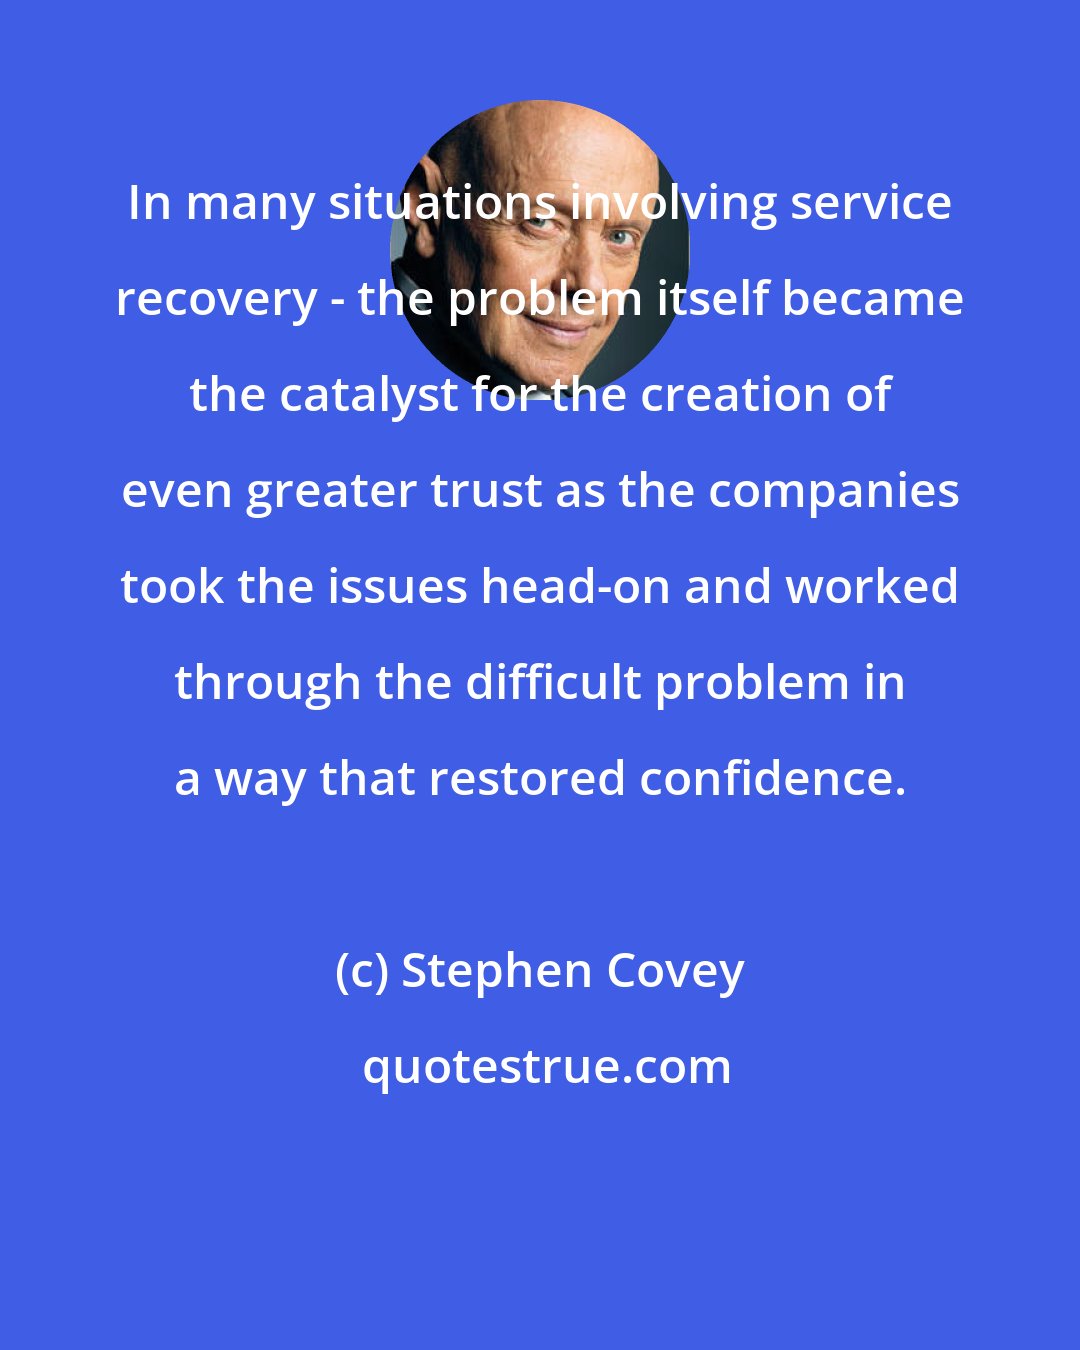 Stephen Covey: In many situations involving service recovery - the problem itself became the catalyst for the creation of even greater trust as the companies took the issues head-on and worked through the difficult problem in a way that restored confidence.